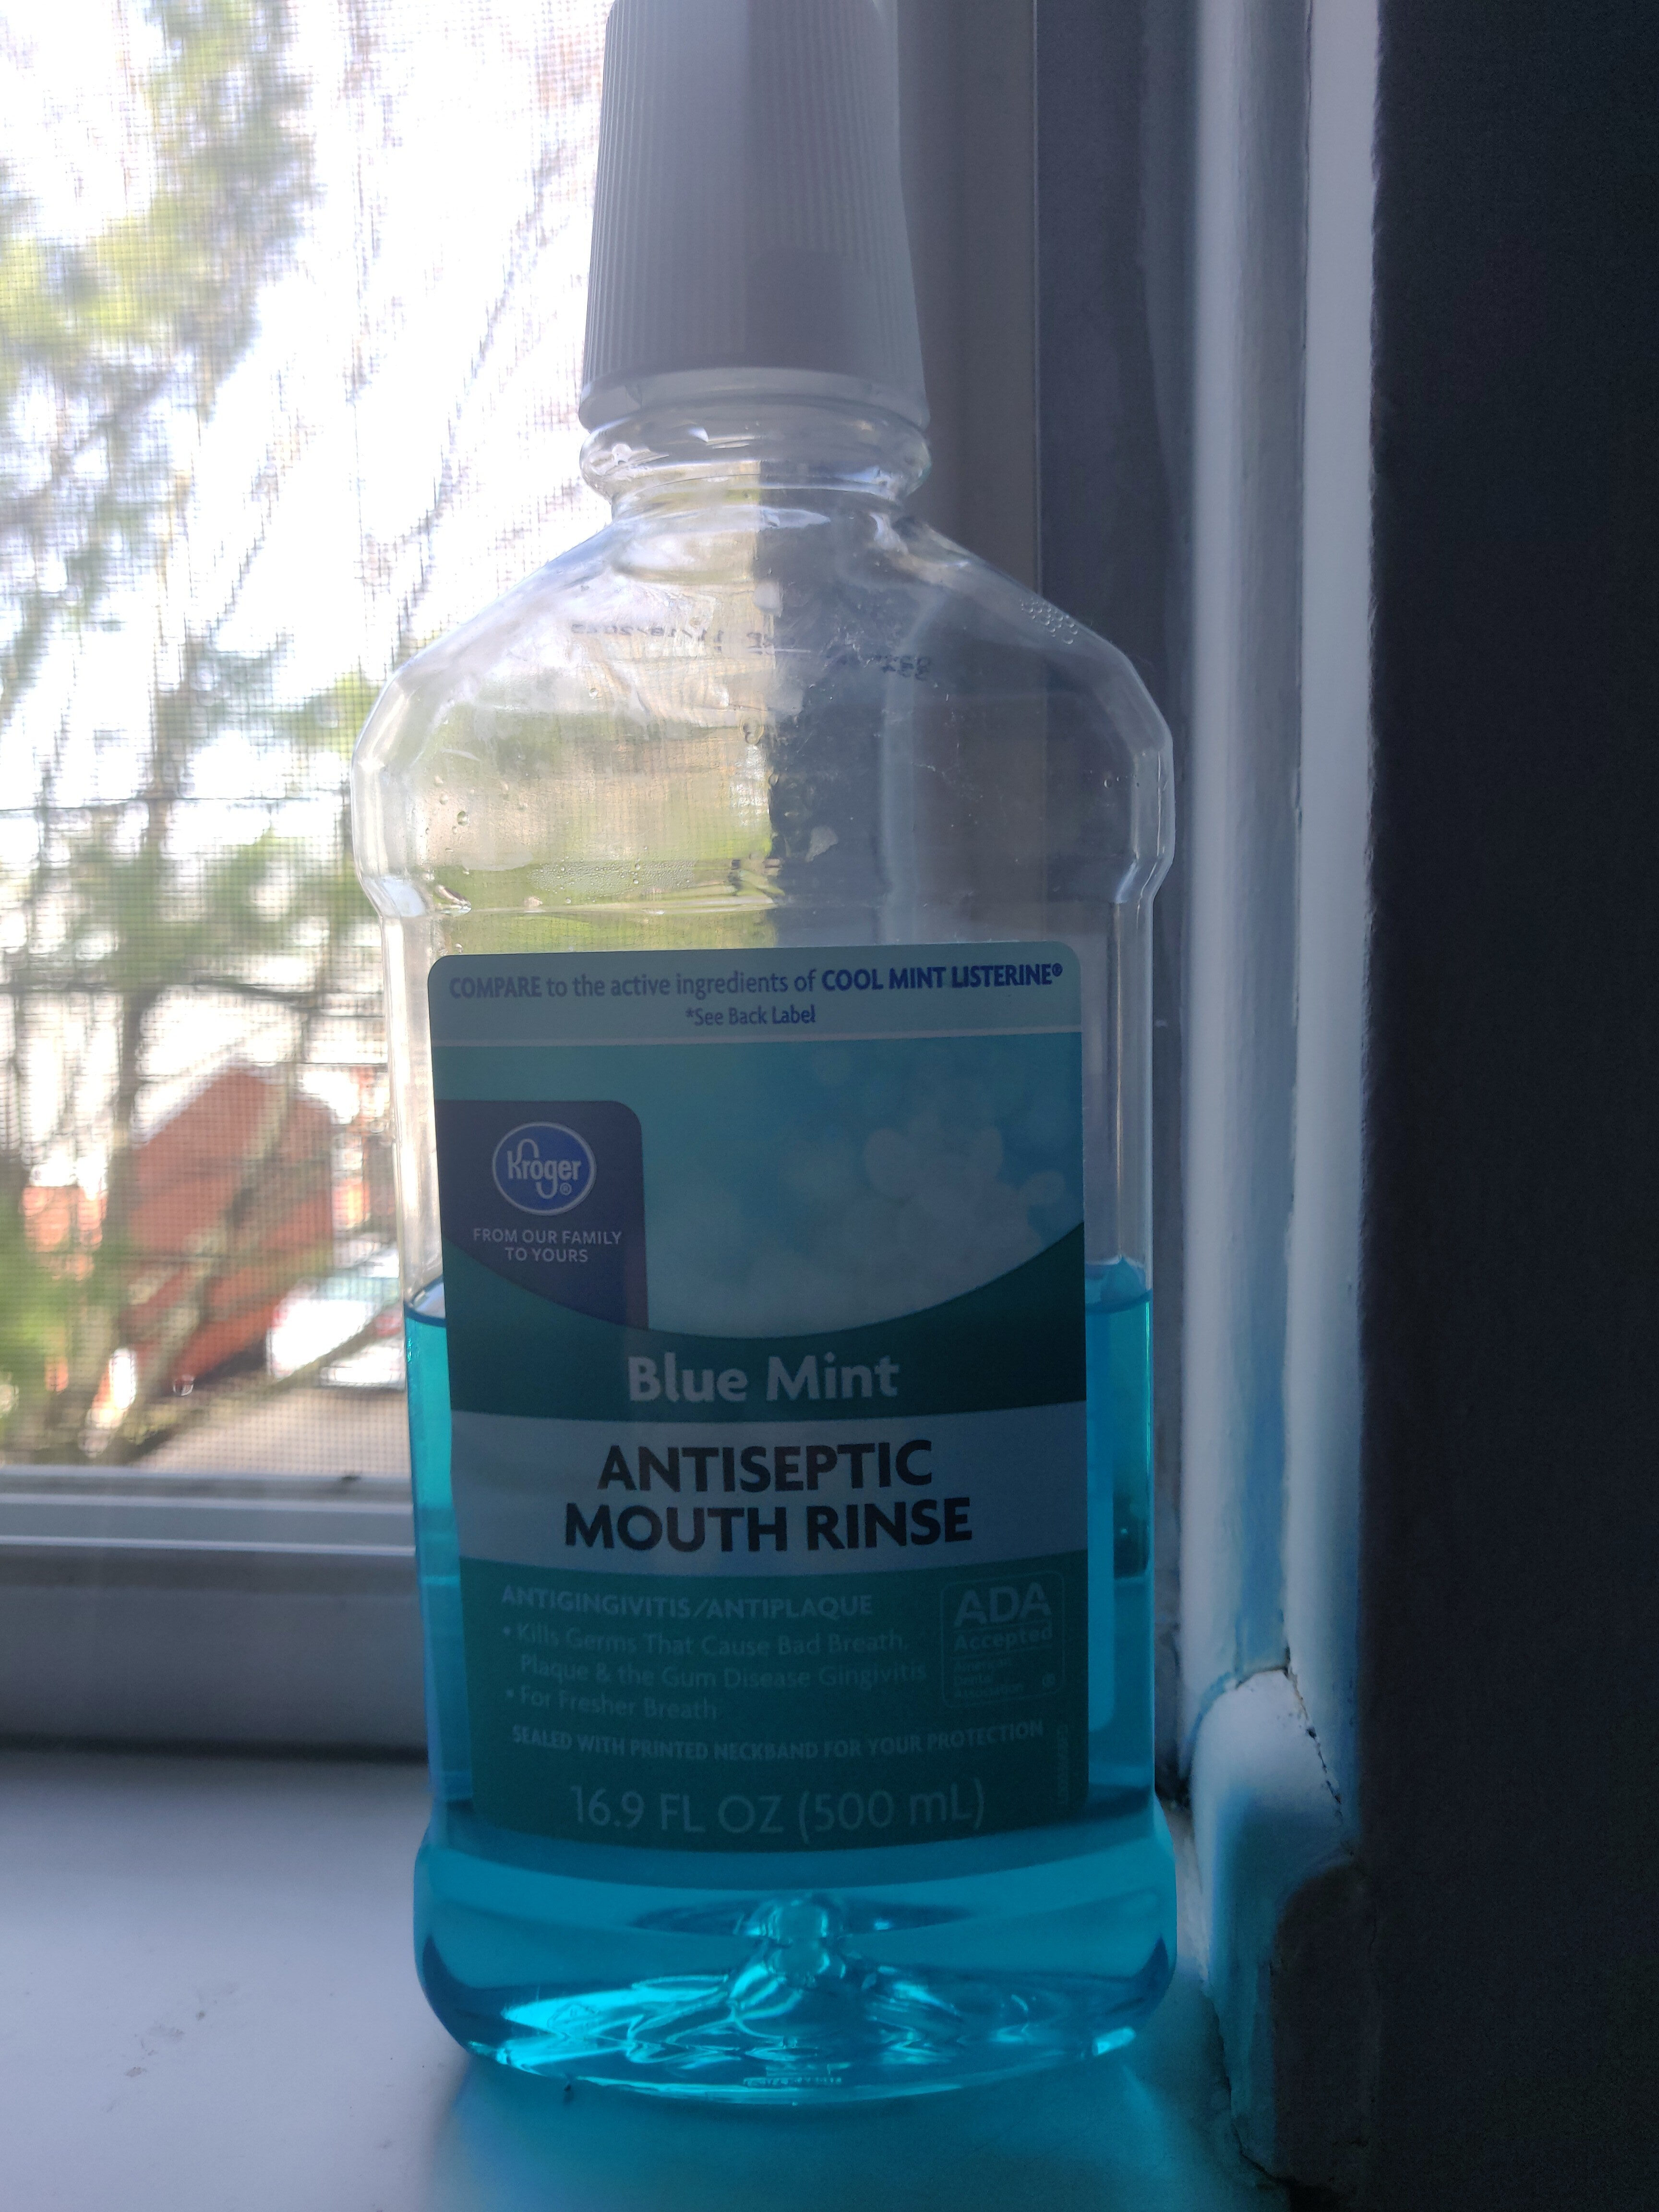 Antiseptic Mouth Rinse - Product - en